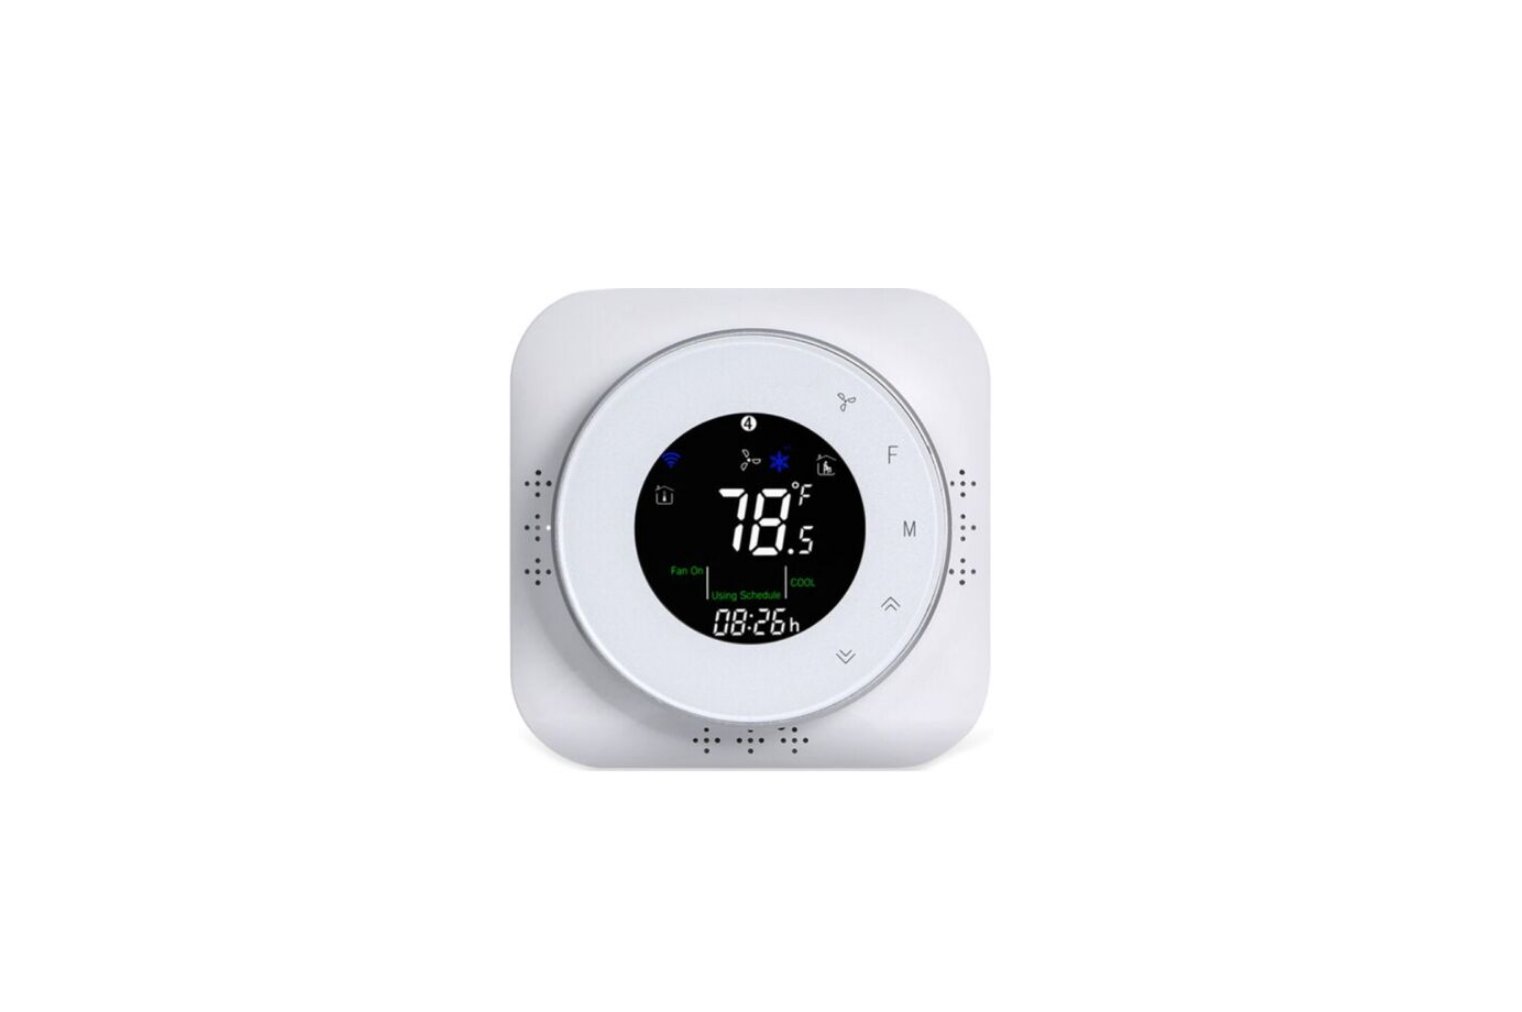 Beca BAC002 Series WiFi Thermostat user Guide